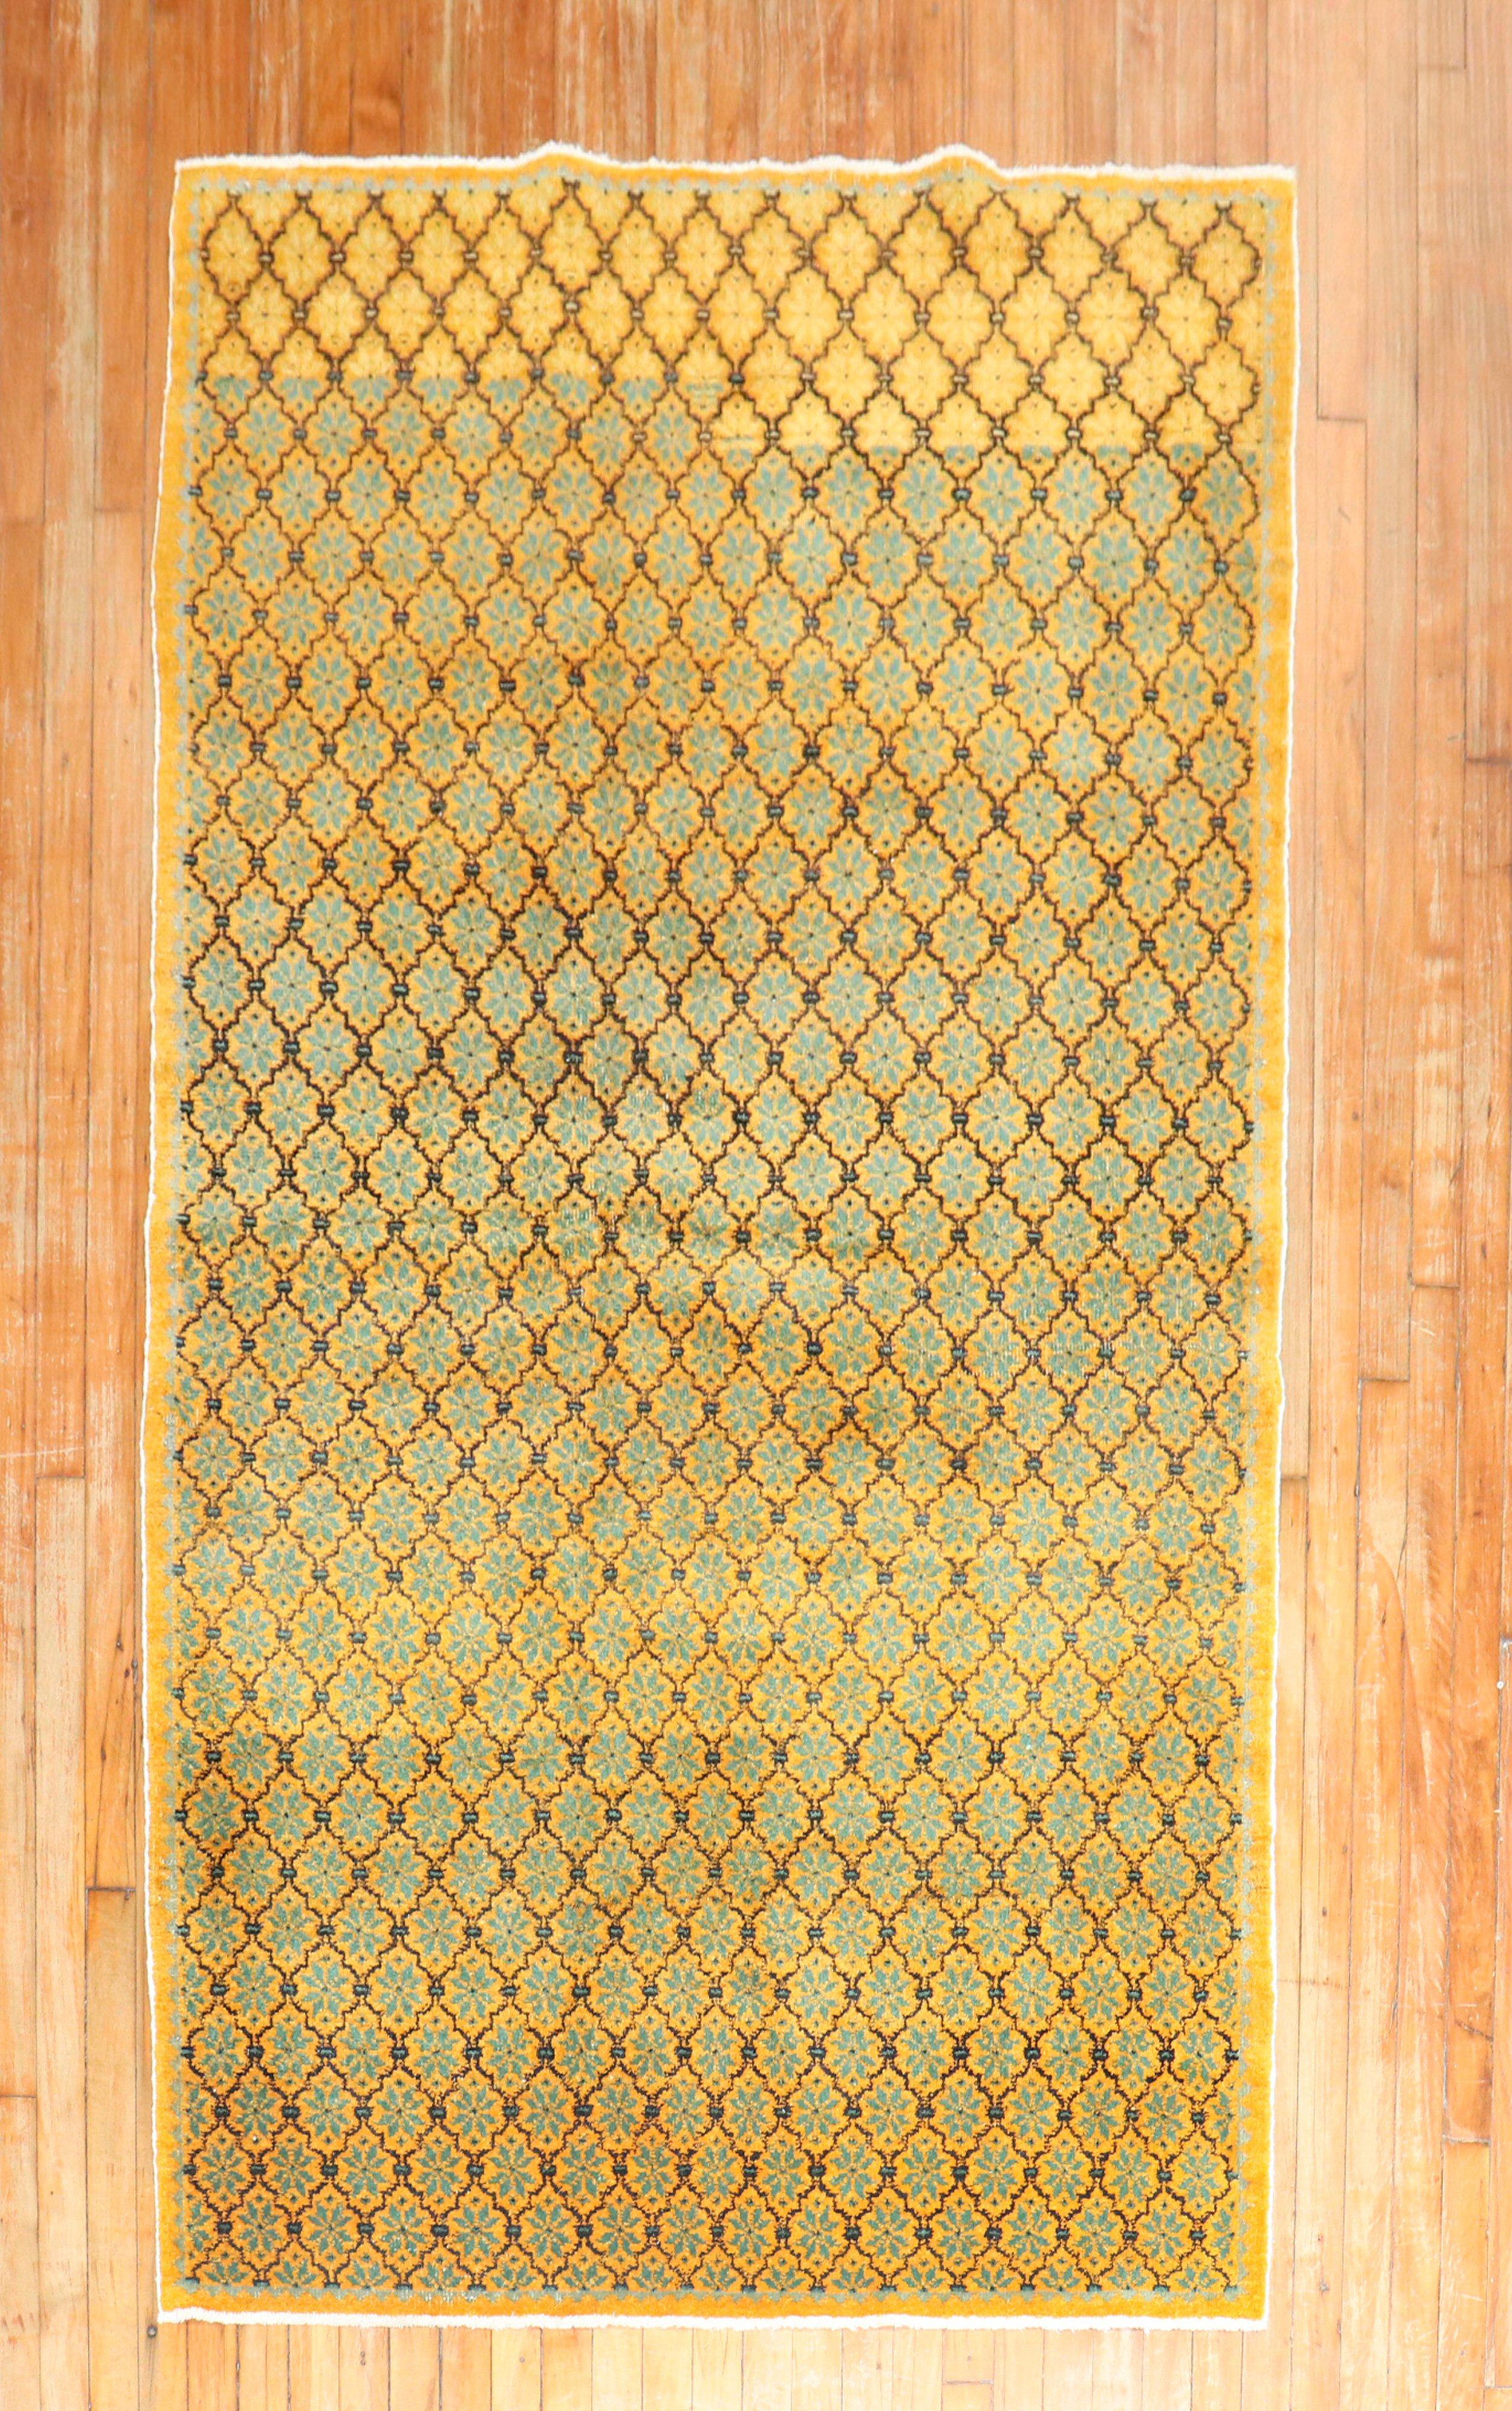 A mid-20th century Turkish rug with an all-over repetitive floral motif in green and brown on saffron field

Measures: 4'3'' x 7'5''.